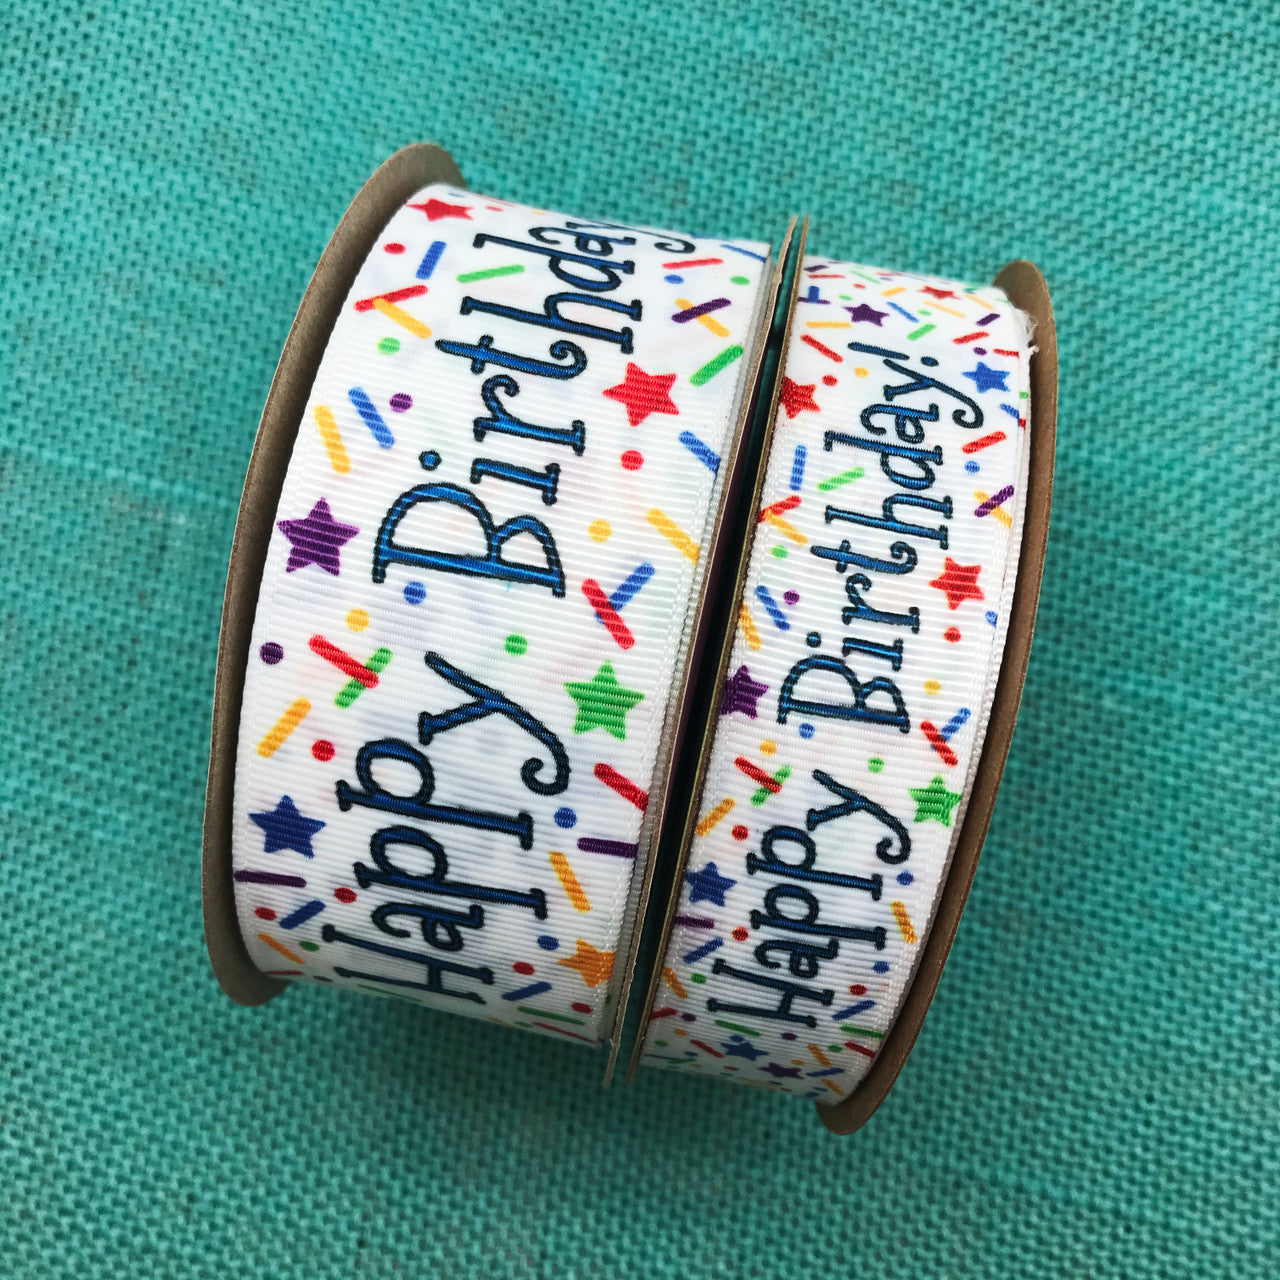 Our Happy Birthday ribbon comes in two sizes! We have 1.5" and 7/8" for larger and smaller projects!